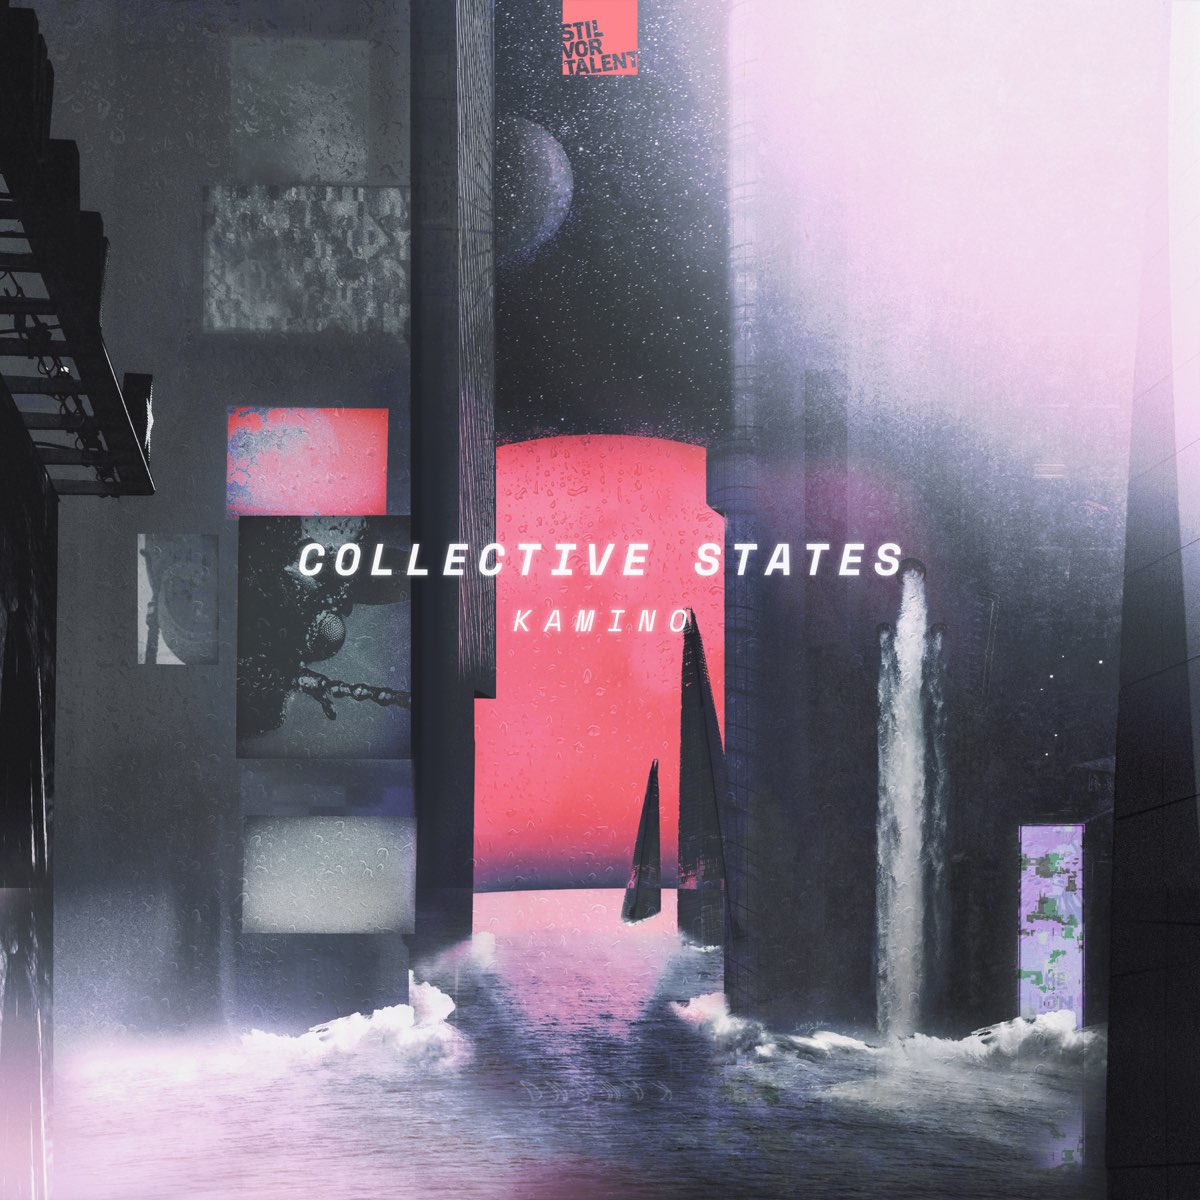 Static collection. Lonesome Ghosts Collective States. Collective States - Resurrection. Blue Moon Marquee Lonesome Ghost Art. Luca Marchese transmit teenage Mutants Heerhorst Remix.